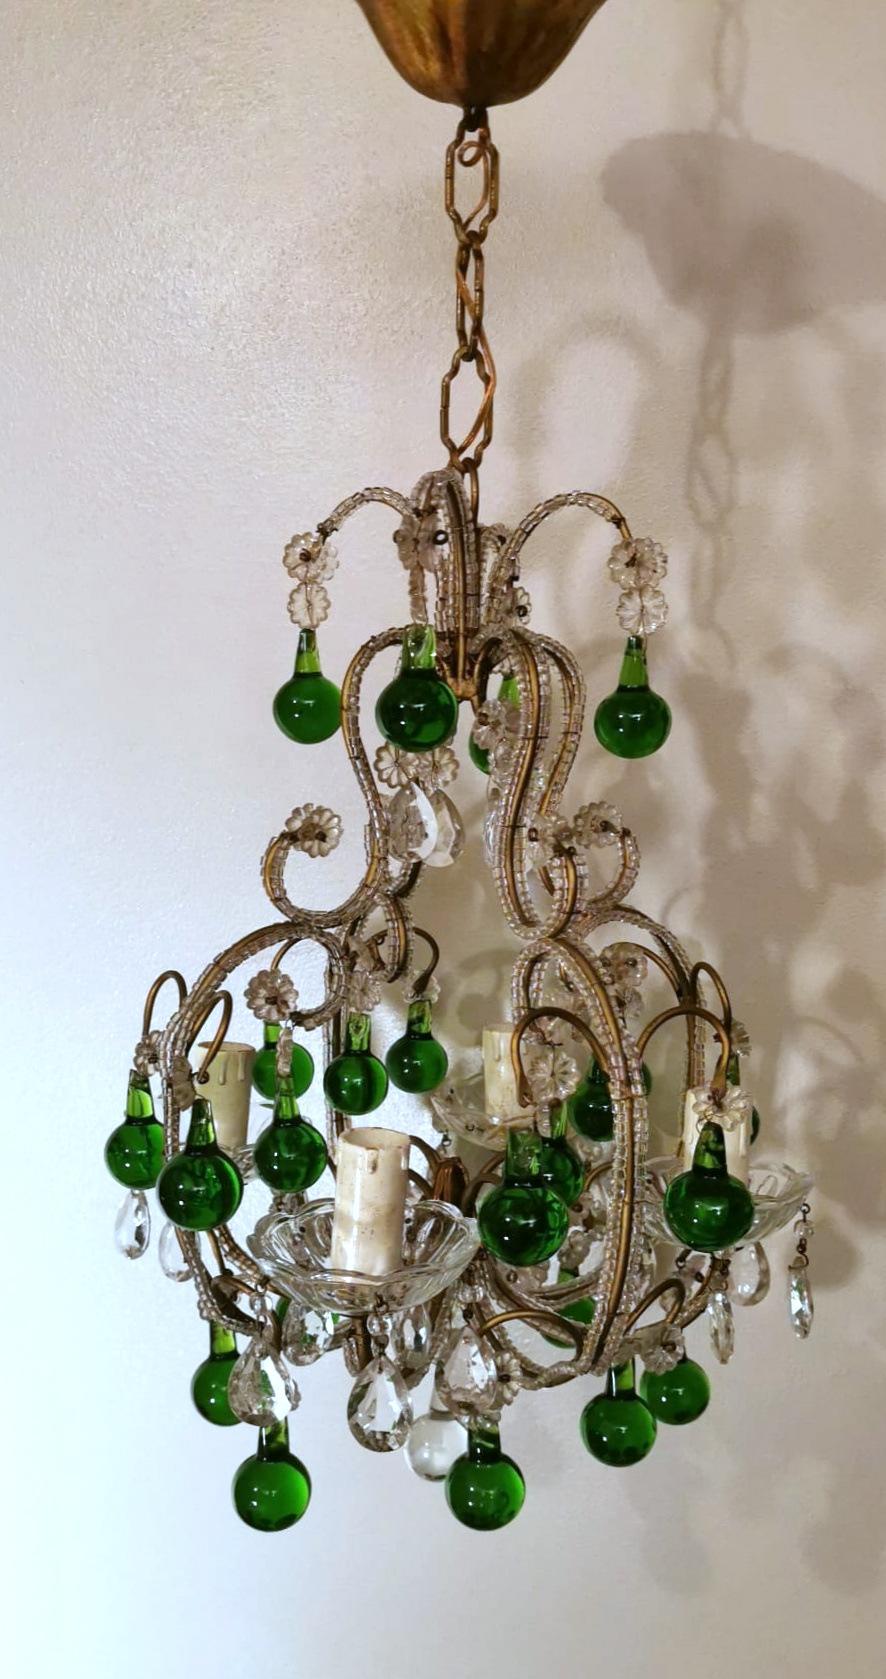 We kindly suggest you read the whole description, because with it we try to give you detailed technical and historical information to guarantee the authenticity of our objects.
Rich and charming Italian chandelier; the elaborate structure is made of